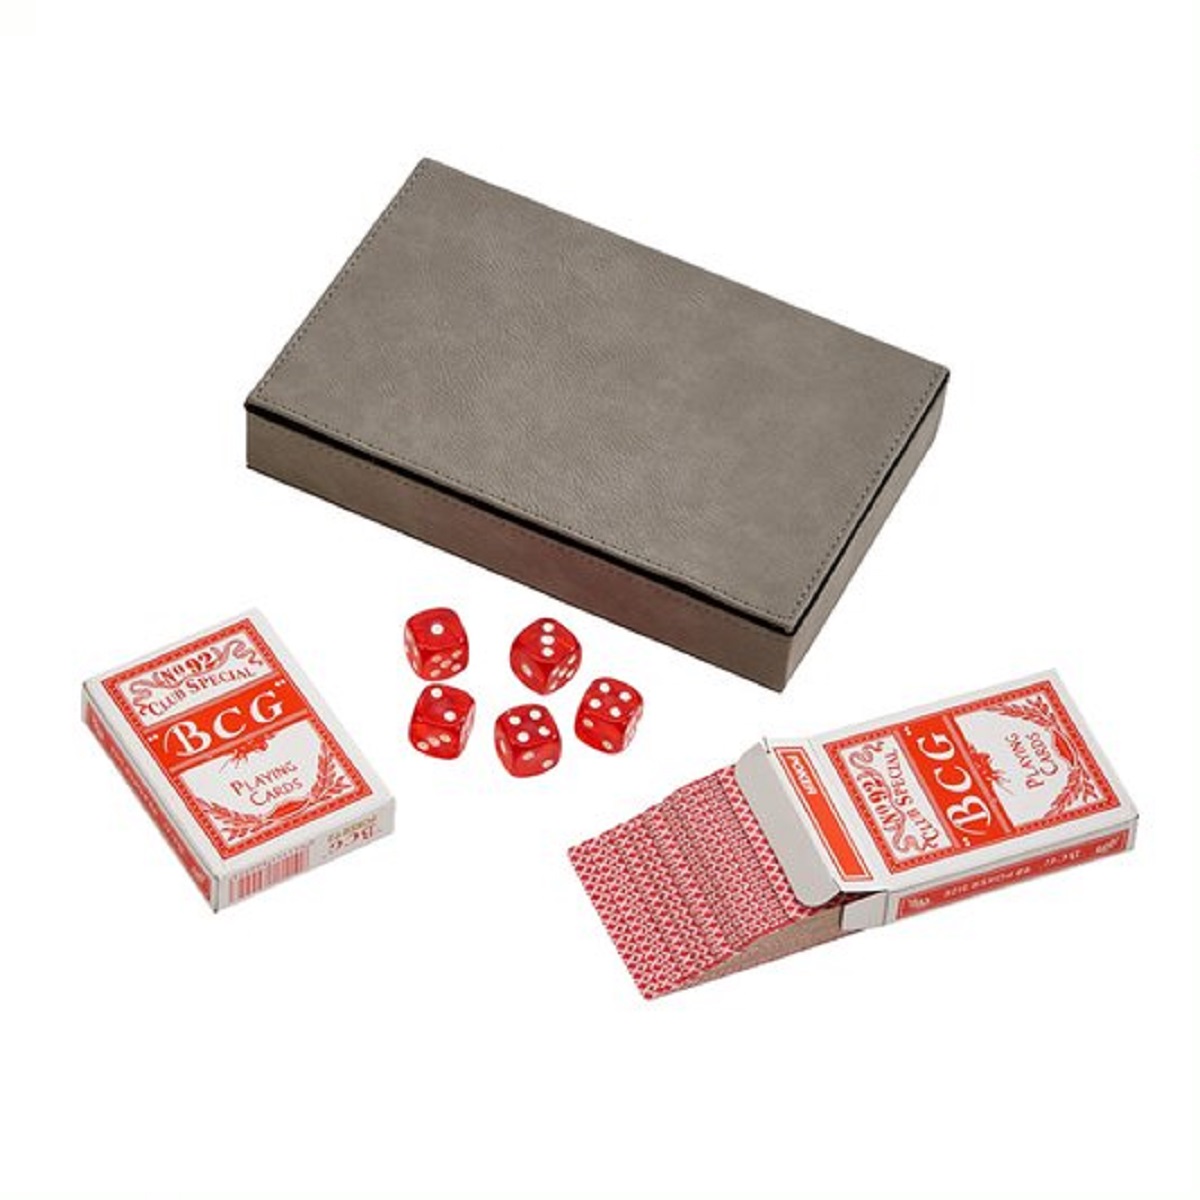 Contemporary Home Living 7.75" x 5" Taupe Gray Leatherette 2-Piece Playing Cards Deck Set